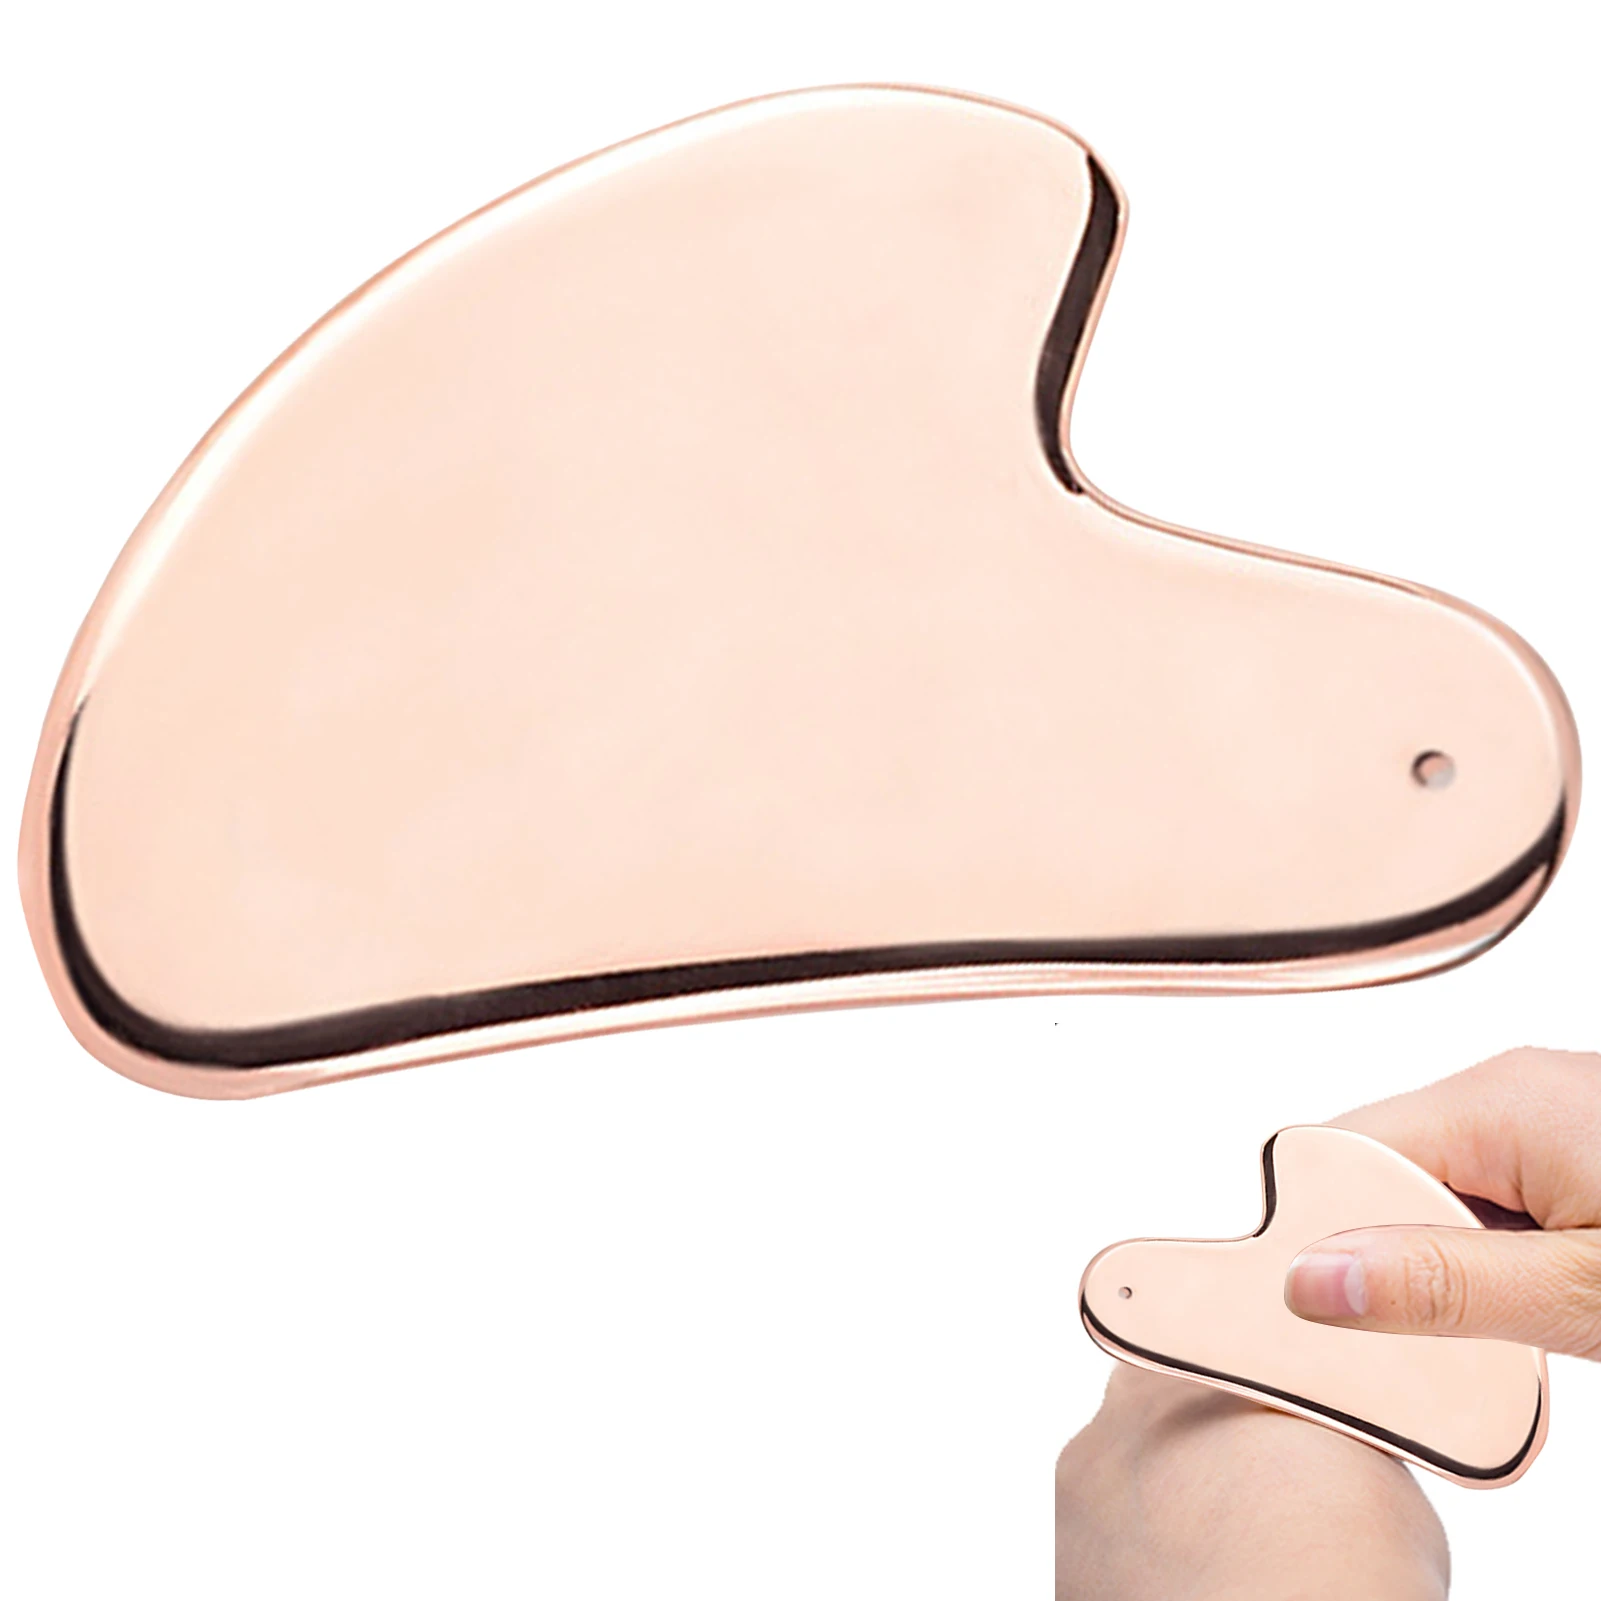 

Gua Sha Tool Gua Sha Scraping Massage Tool For Full Body Gua Sha Tool For Facial SPA Reduce Eye Puffiness Relieve Tensions And